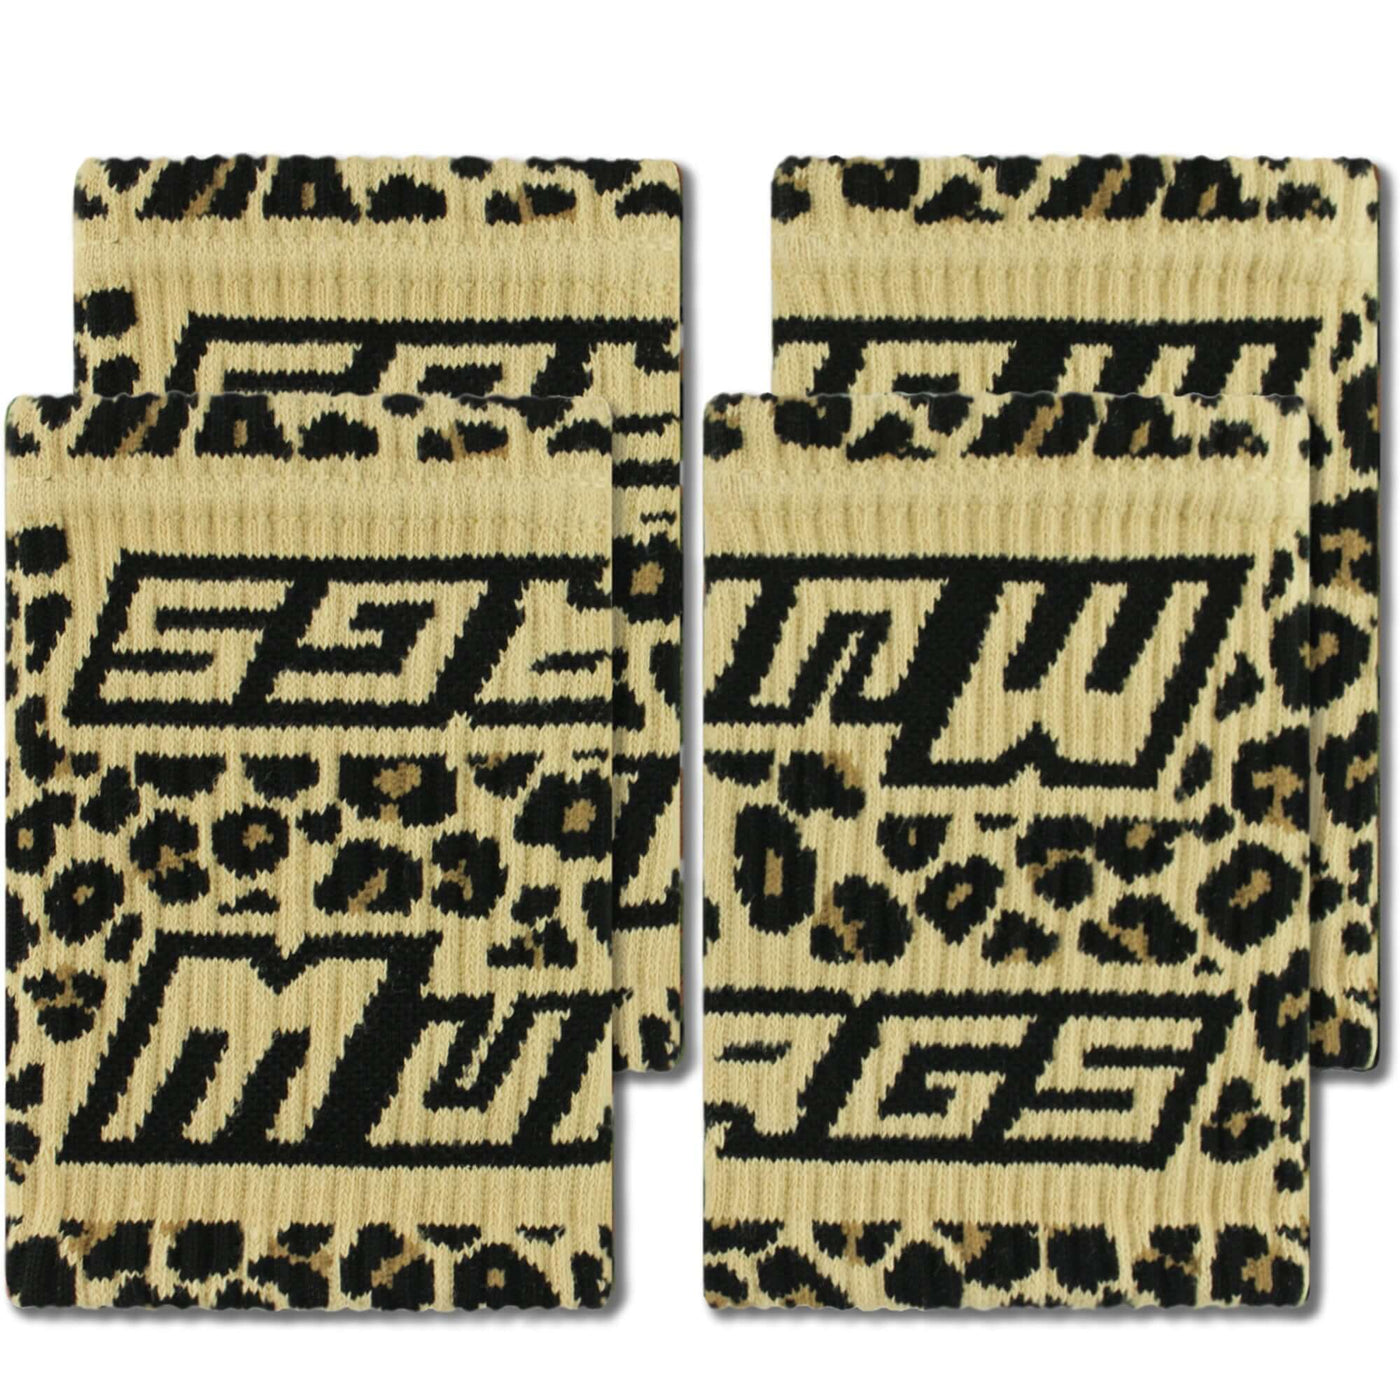 Wristbands - Leopard (2 Pairs)